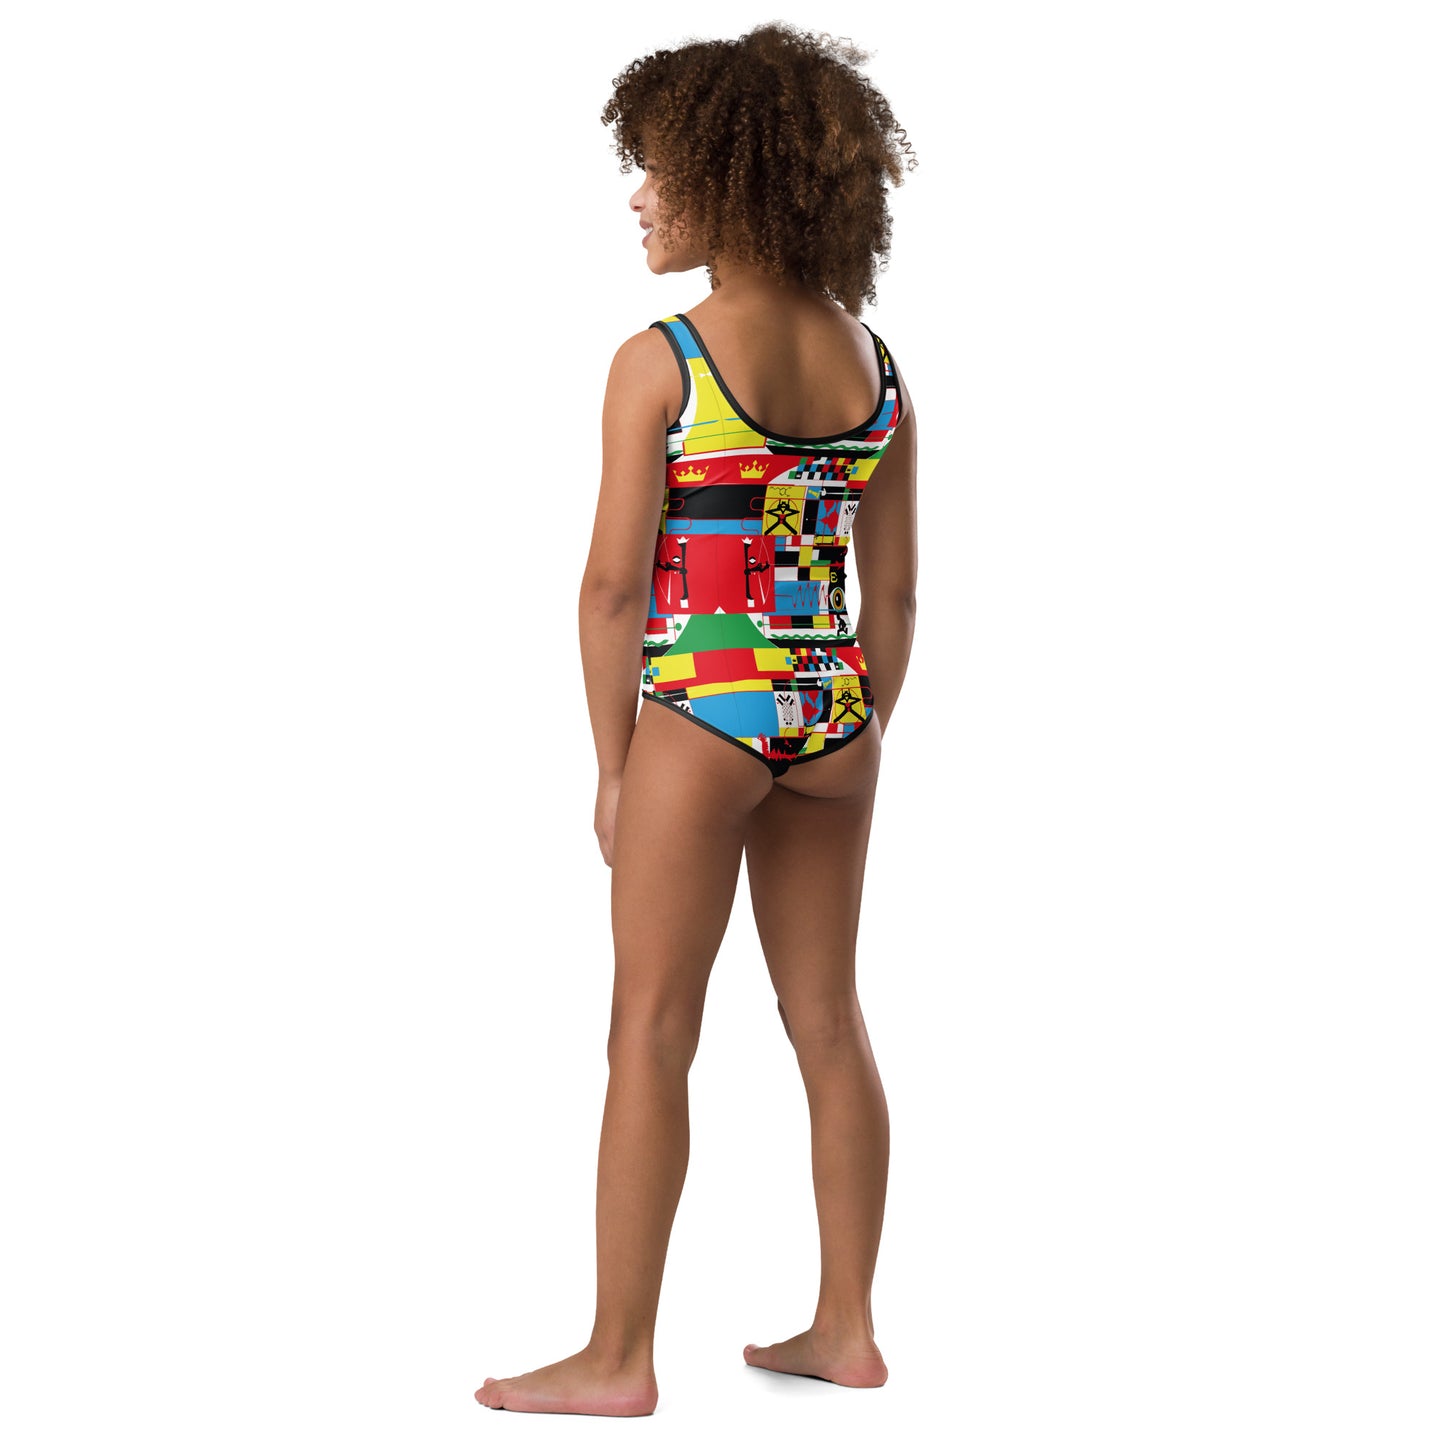 All-Over Print Kids Swimsuit CHANCE